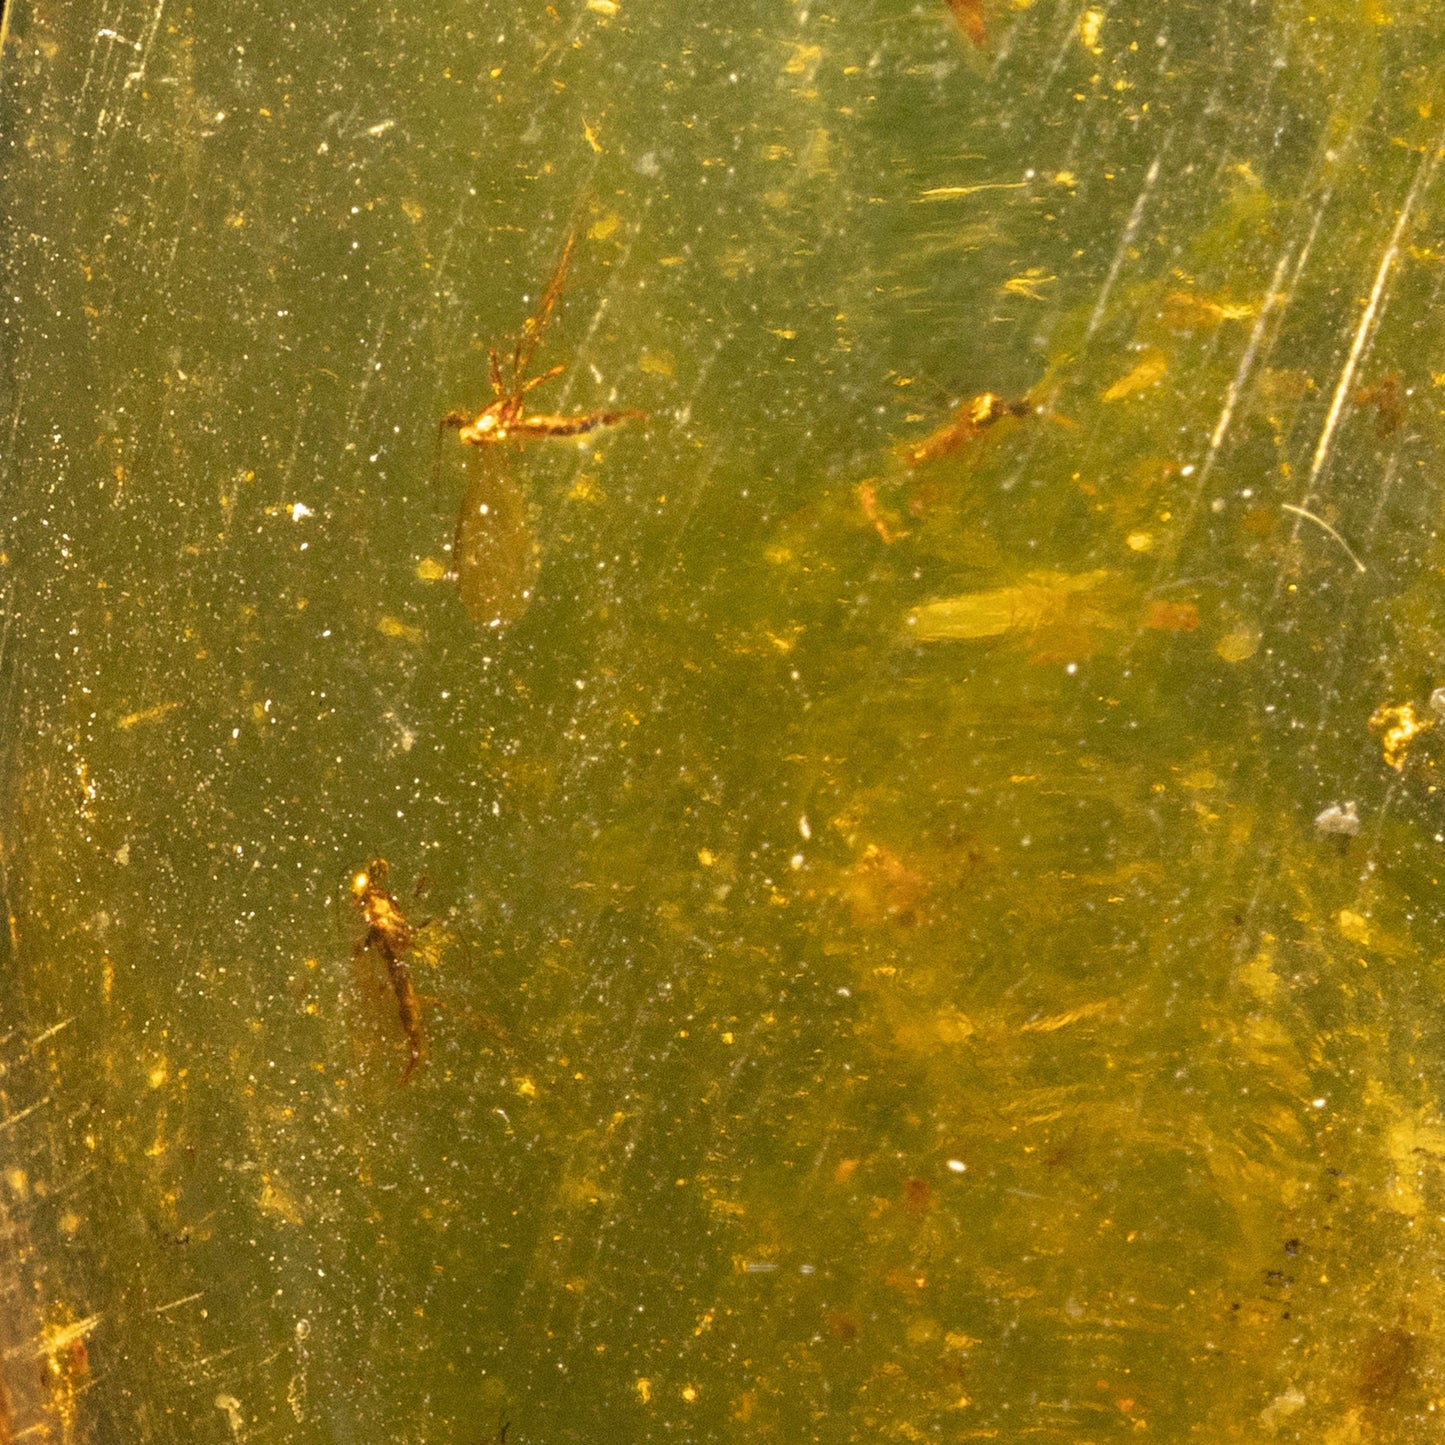 Baltic Amber With Non-Biting Midge and Gnats // 6.03 Grams